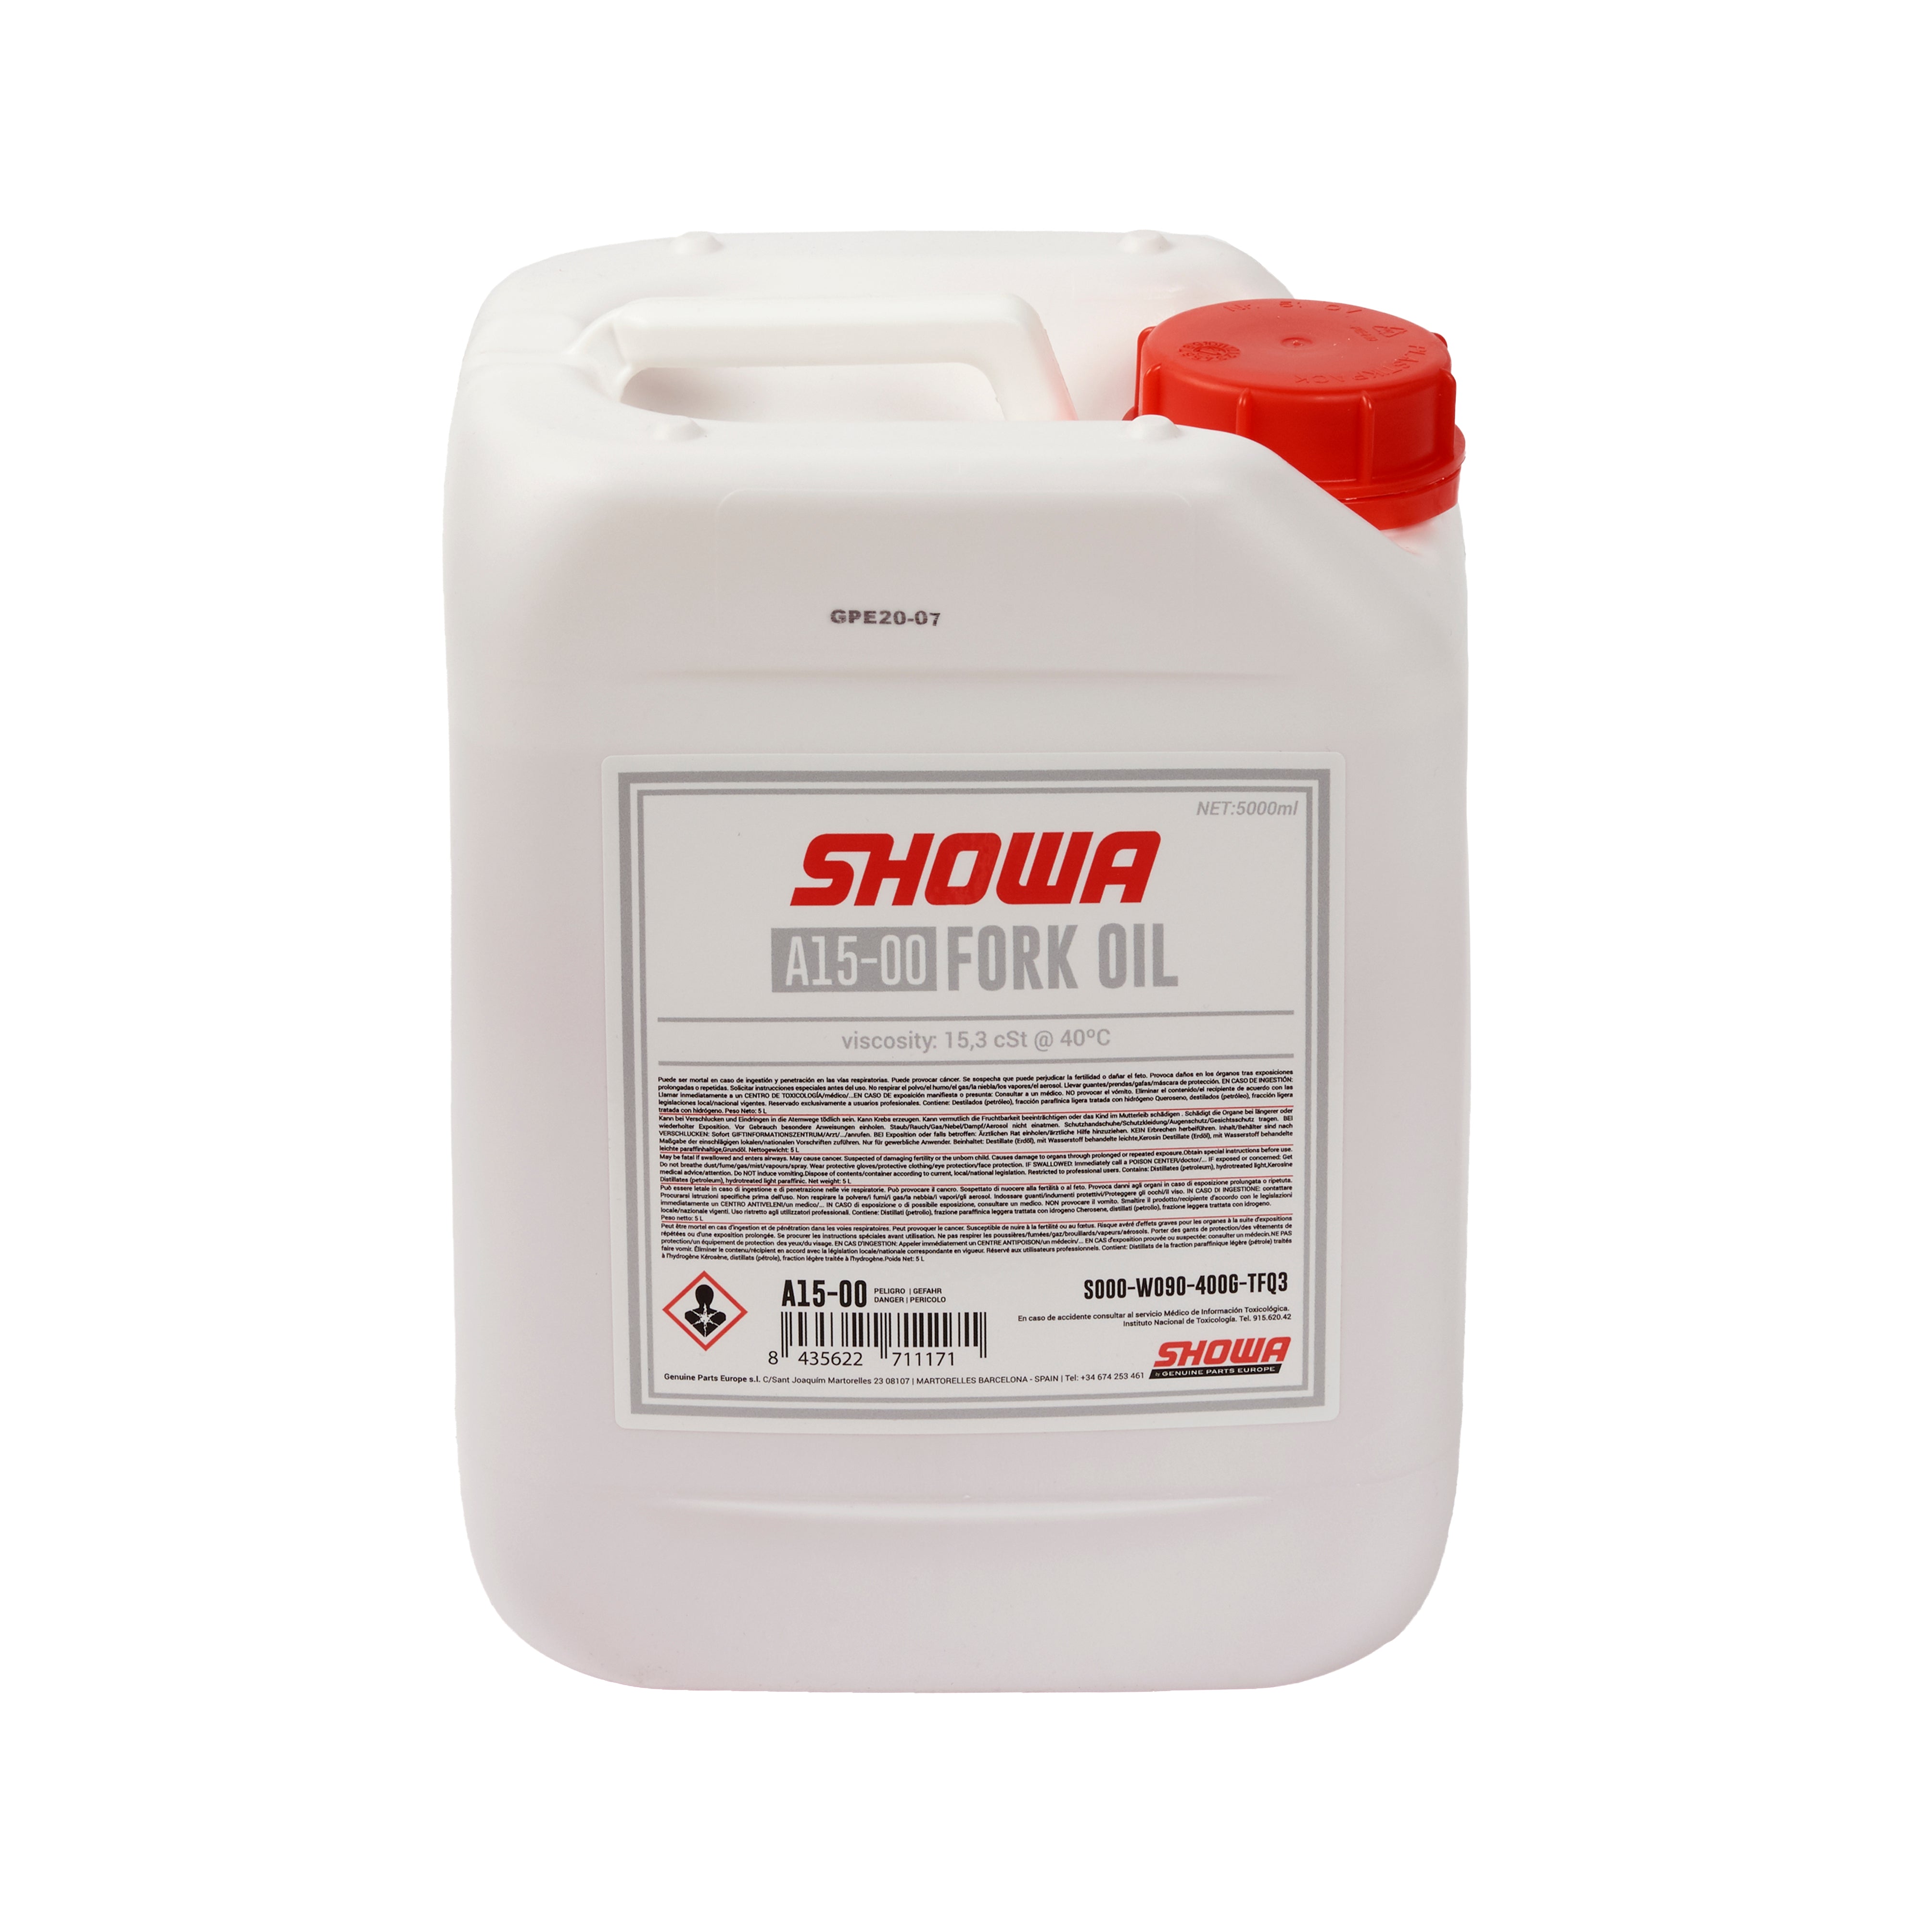 SHOWA FF OIL A1500 (15,3 CST at 40¼C) 5 LITER